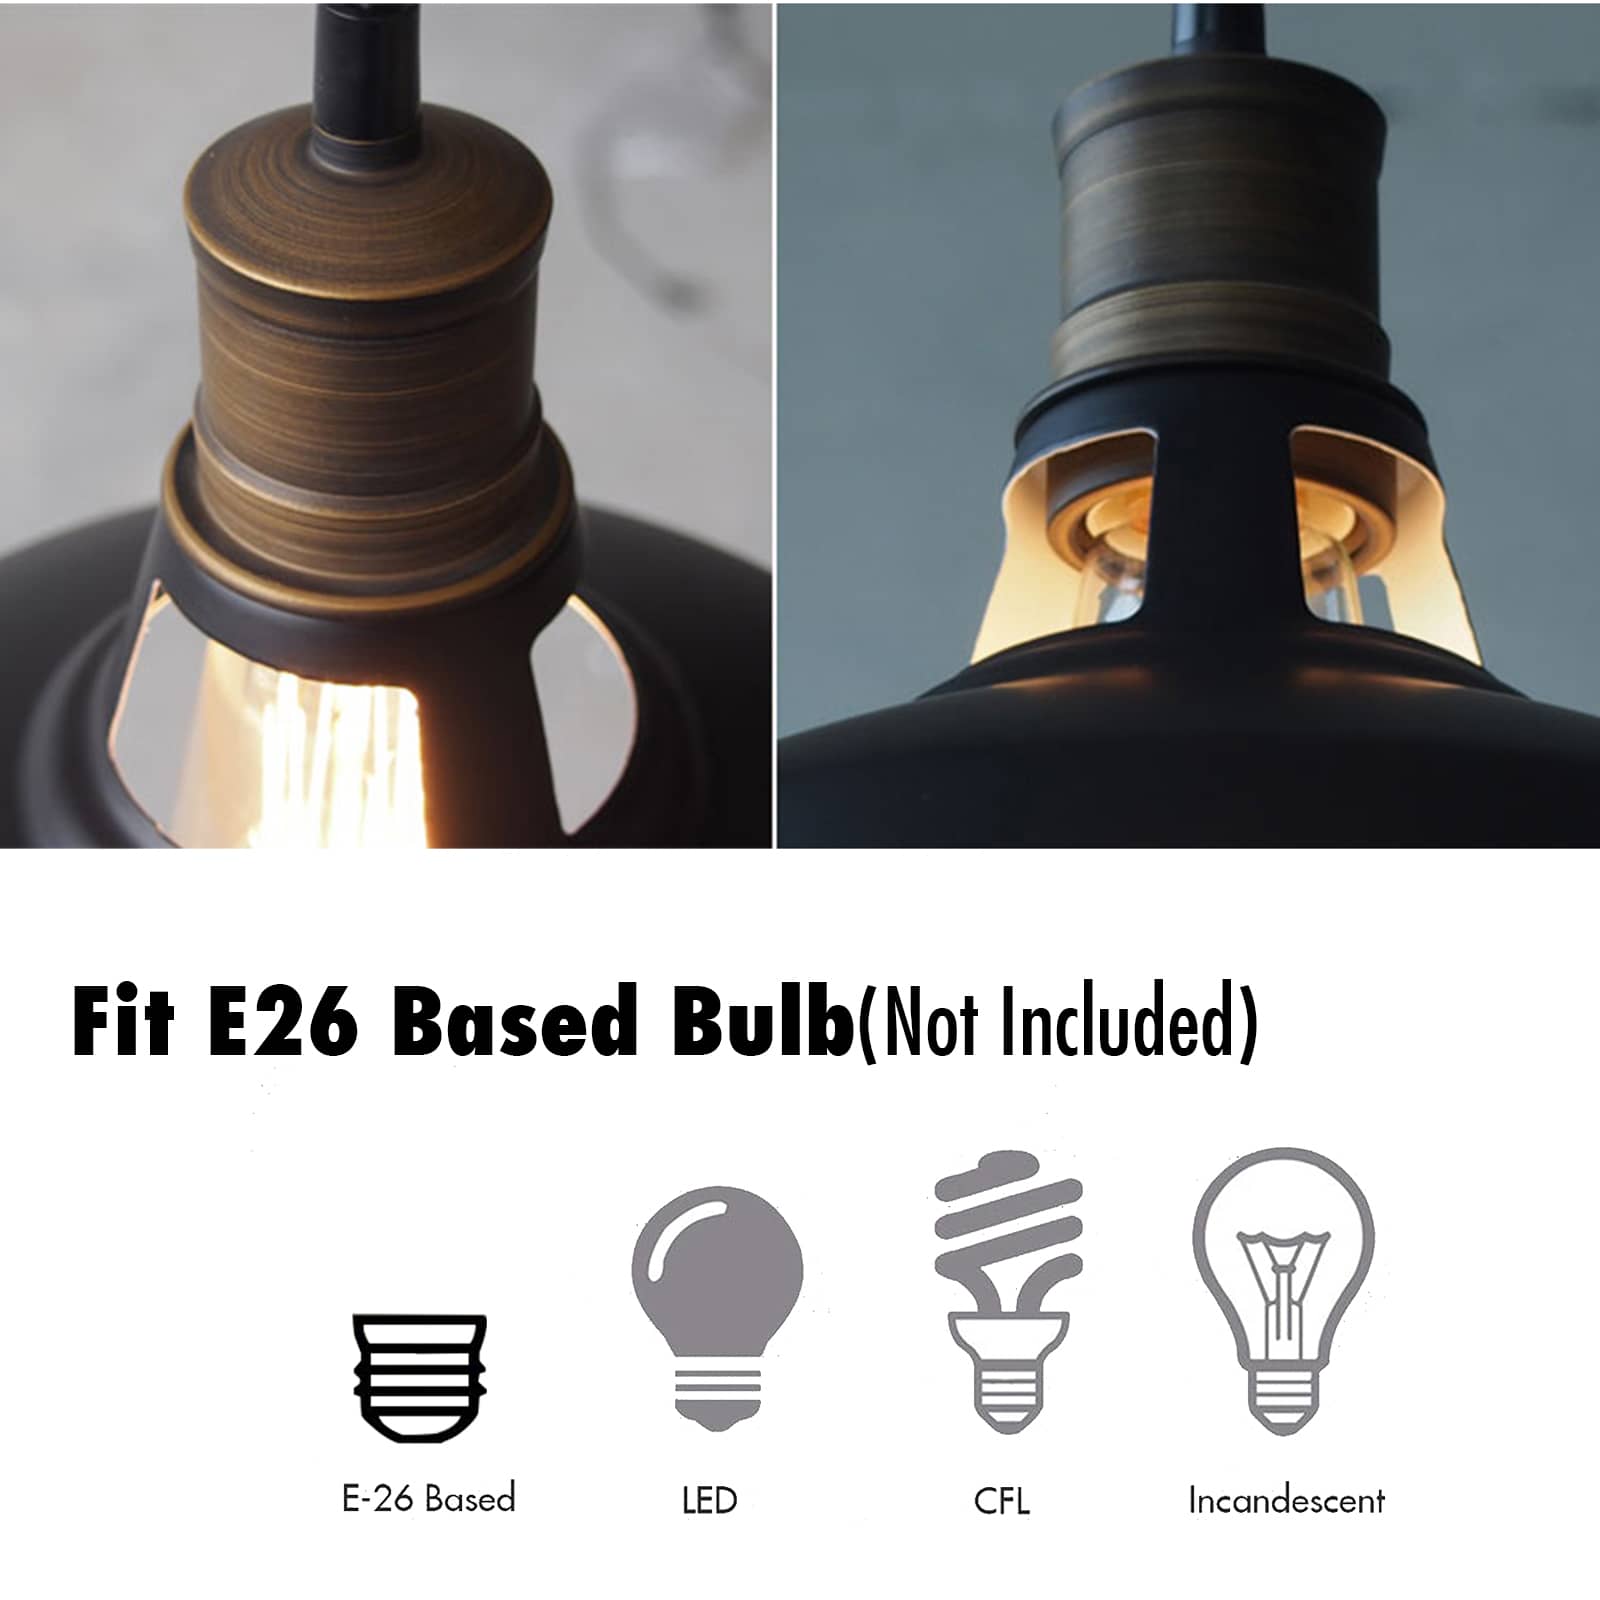 Industrial Plug-In Pendant Light Barn Shape On/Off Switch Set of 2